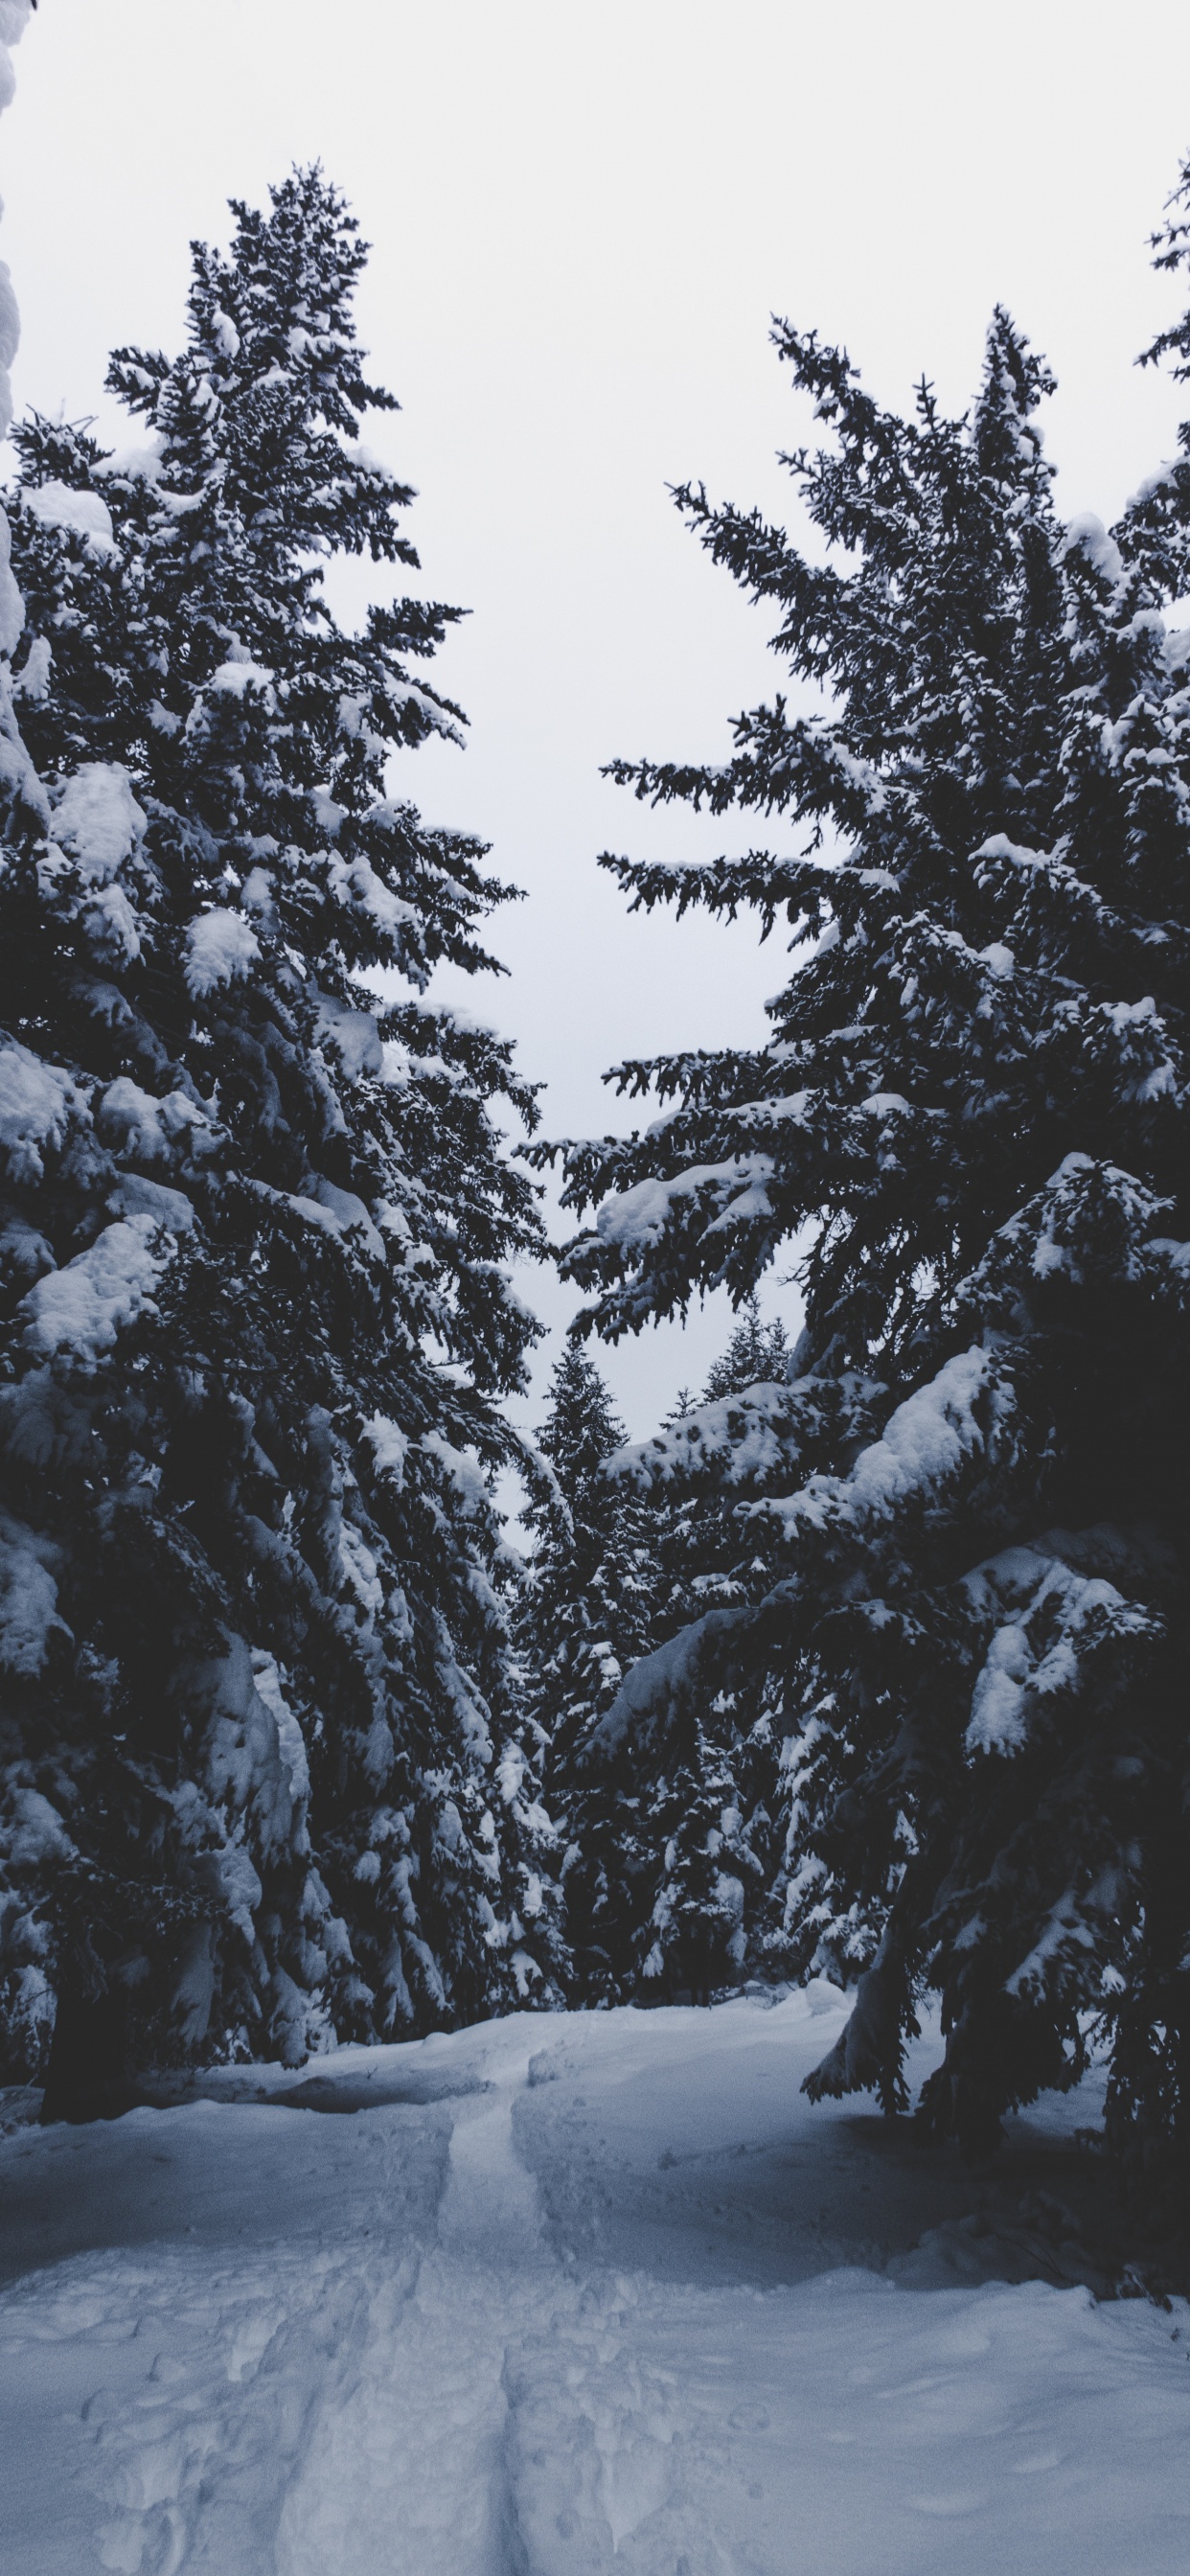 Neige, Hiver, Congélation, Plantes Ligneuses, Sapin. Wallpaper in 1242x2688 Resolution